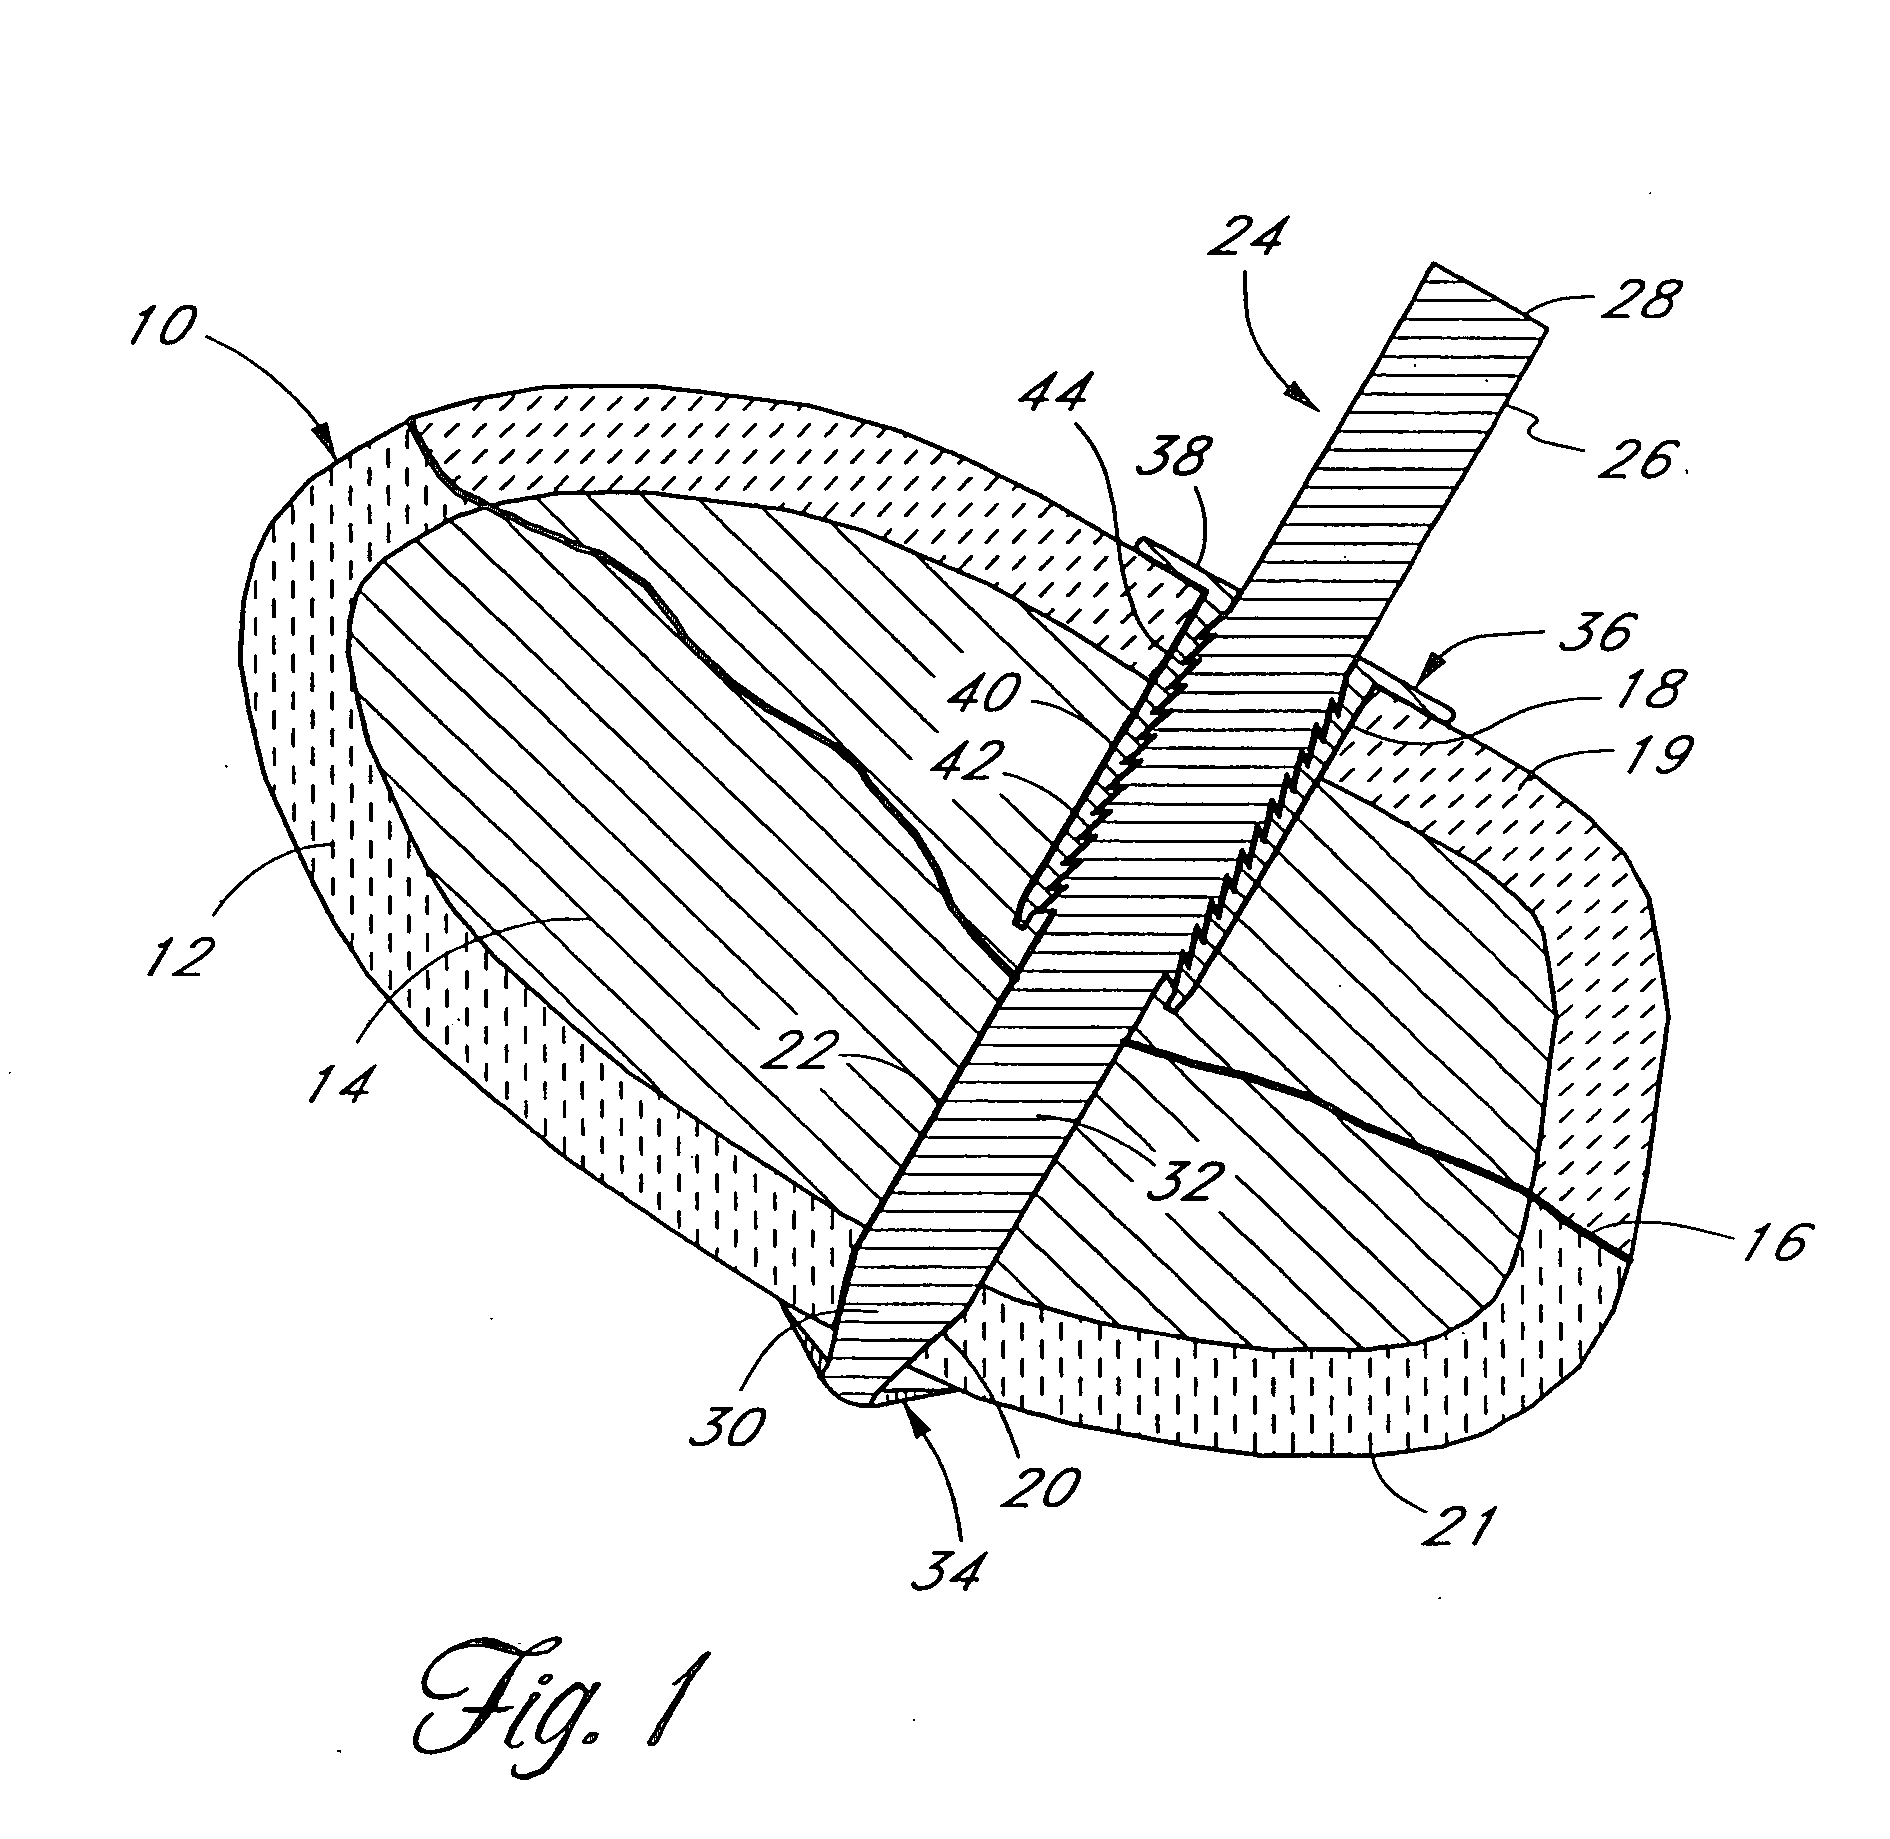 Bone fixation system with radially extendable anchor